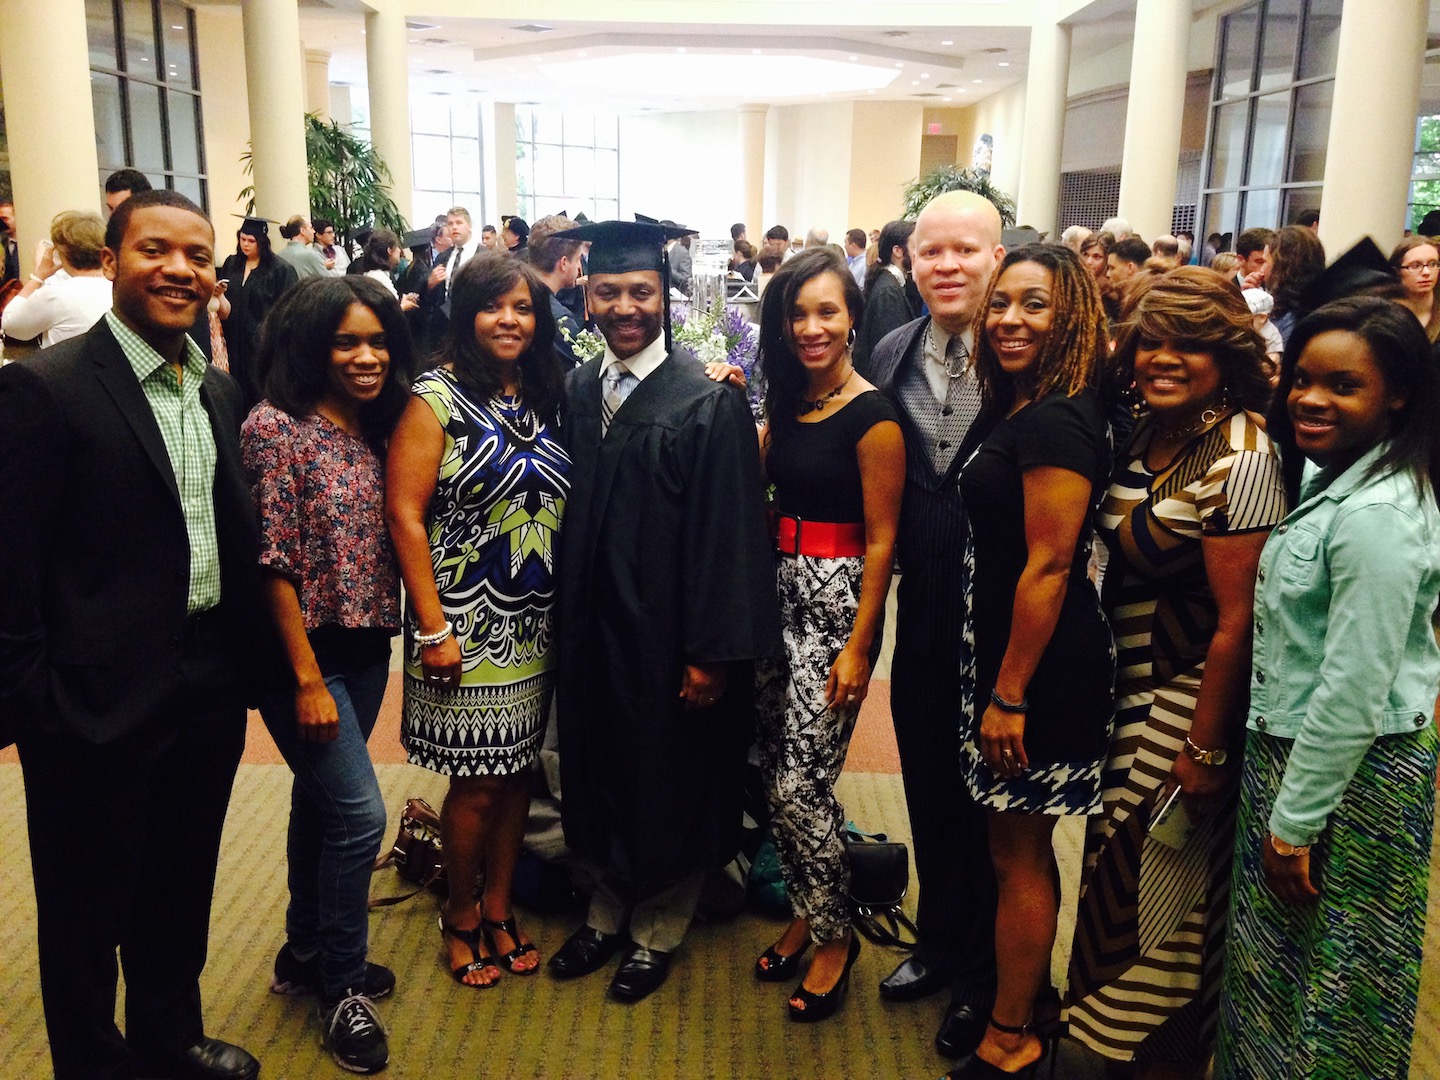 Sidney and family at his graduation